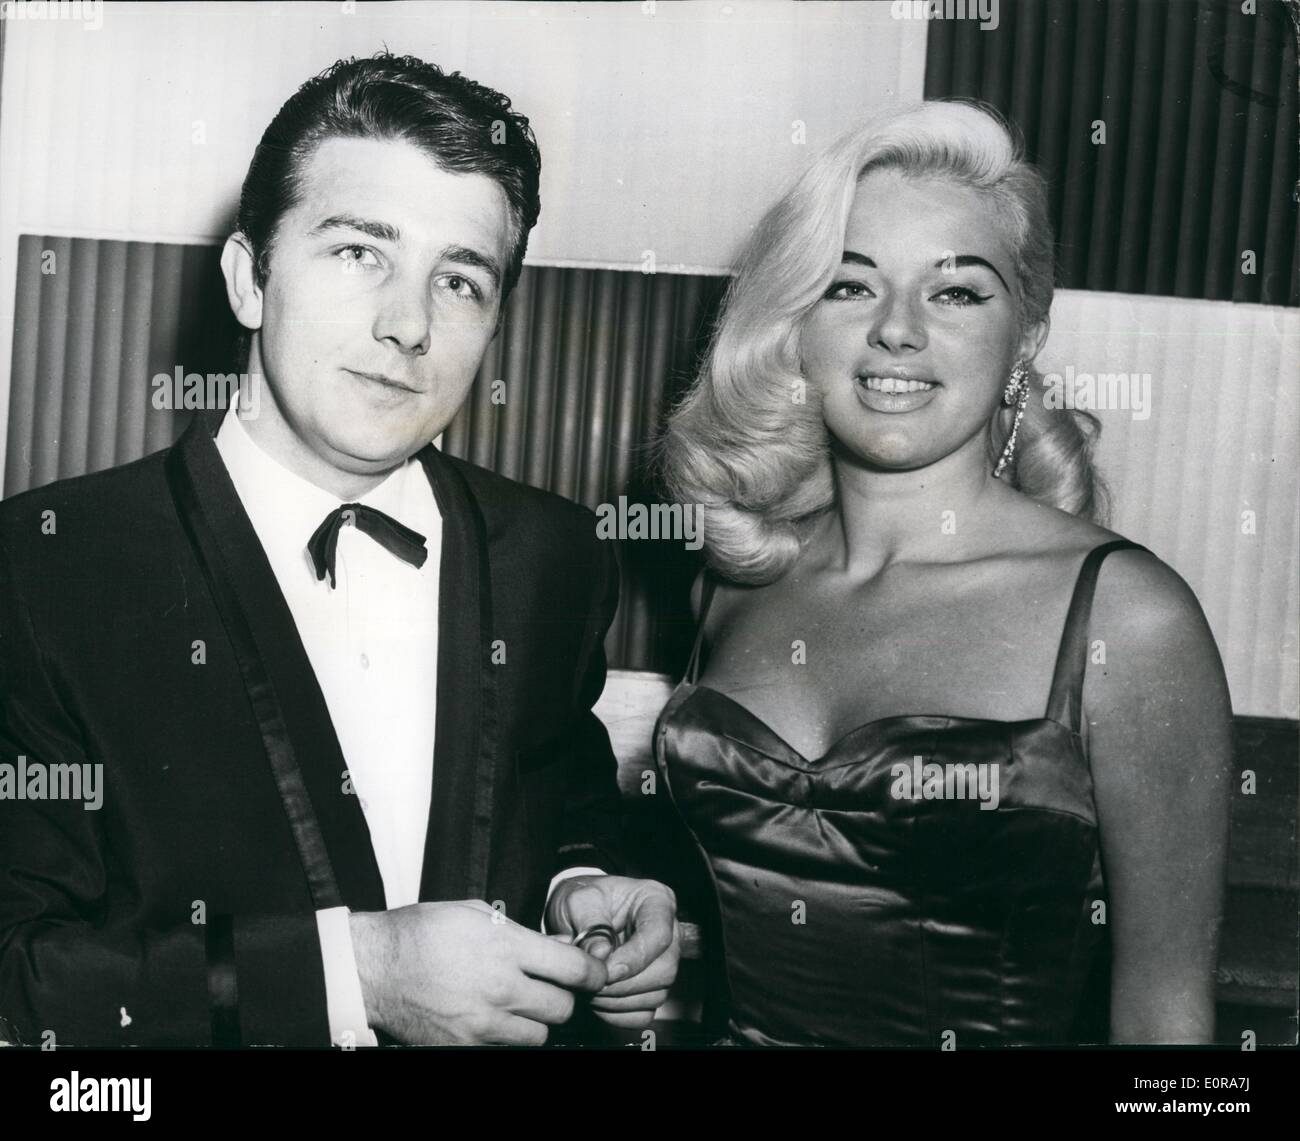 Nov. 11, 1958 - DIANA DORS ON TV TONIGHT: DIANA DORS was to be seen at the Riverside Studios this afternoon, rehearsing for her Stock Photo